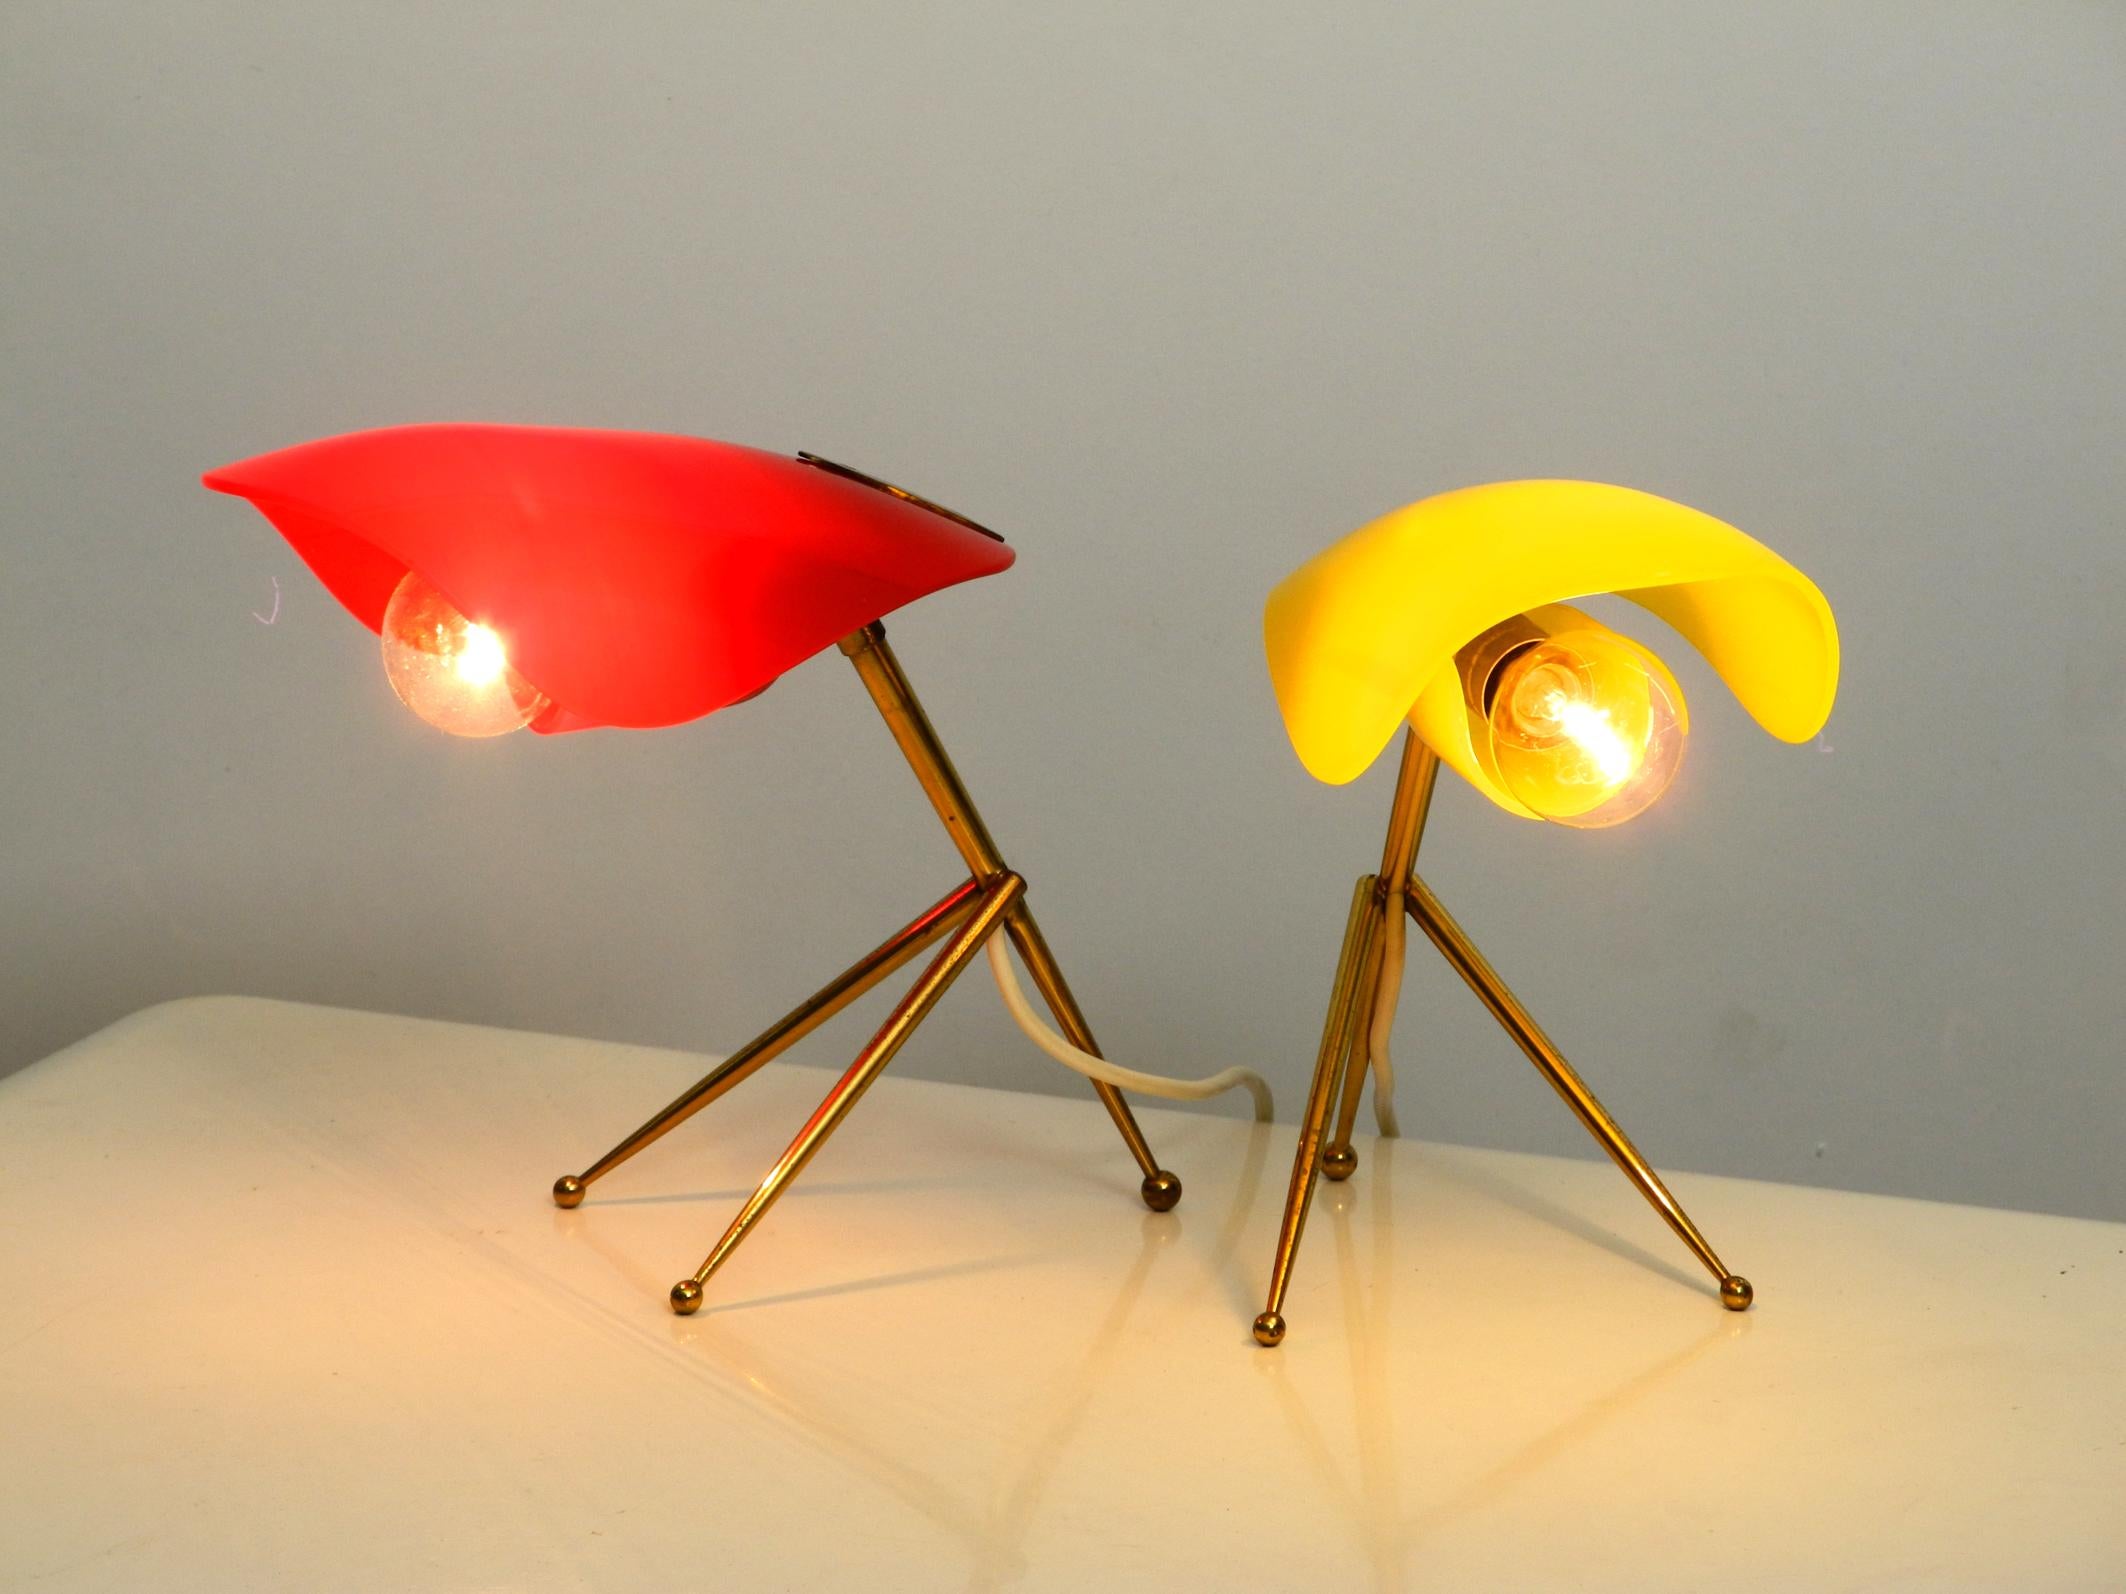 Pair of Rare Midcentury Table Lamps by WKR Germany with Plexiglass Lampshades For Sale 3